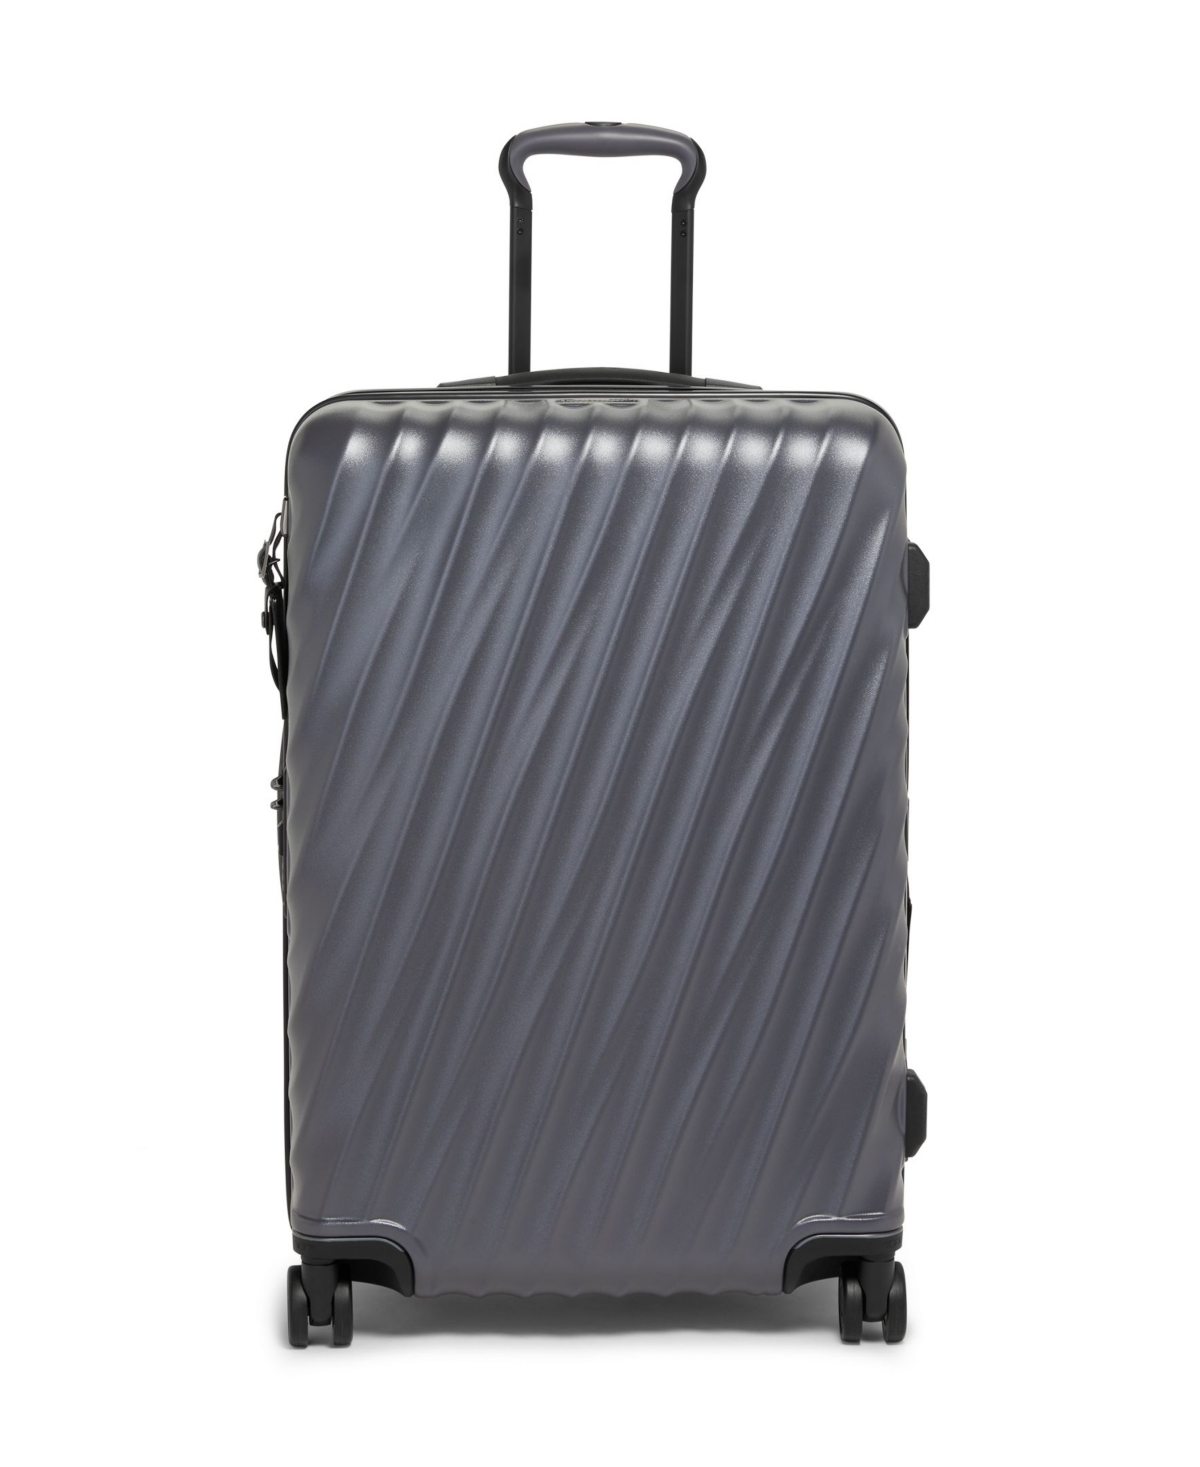 Tumi 19 Degree Short Trip Expandable 4 Wheeled Packing Case In Gray Texture